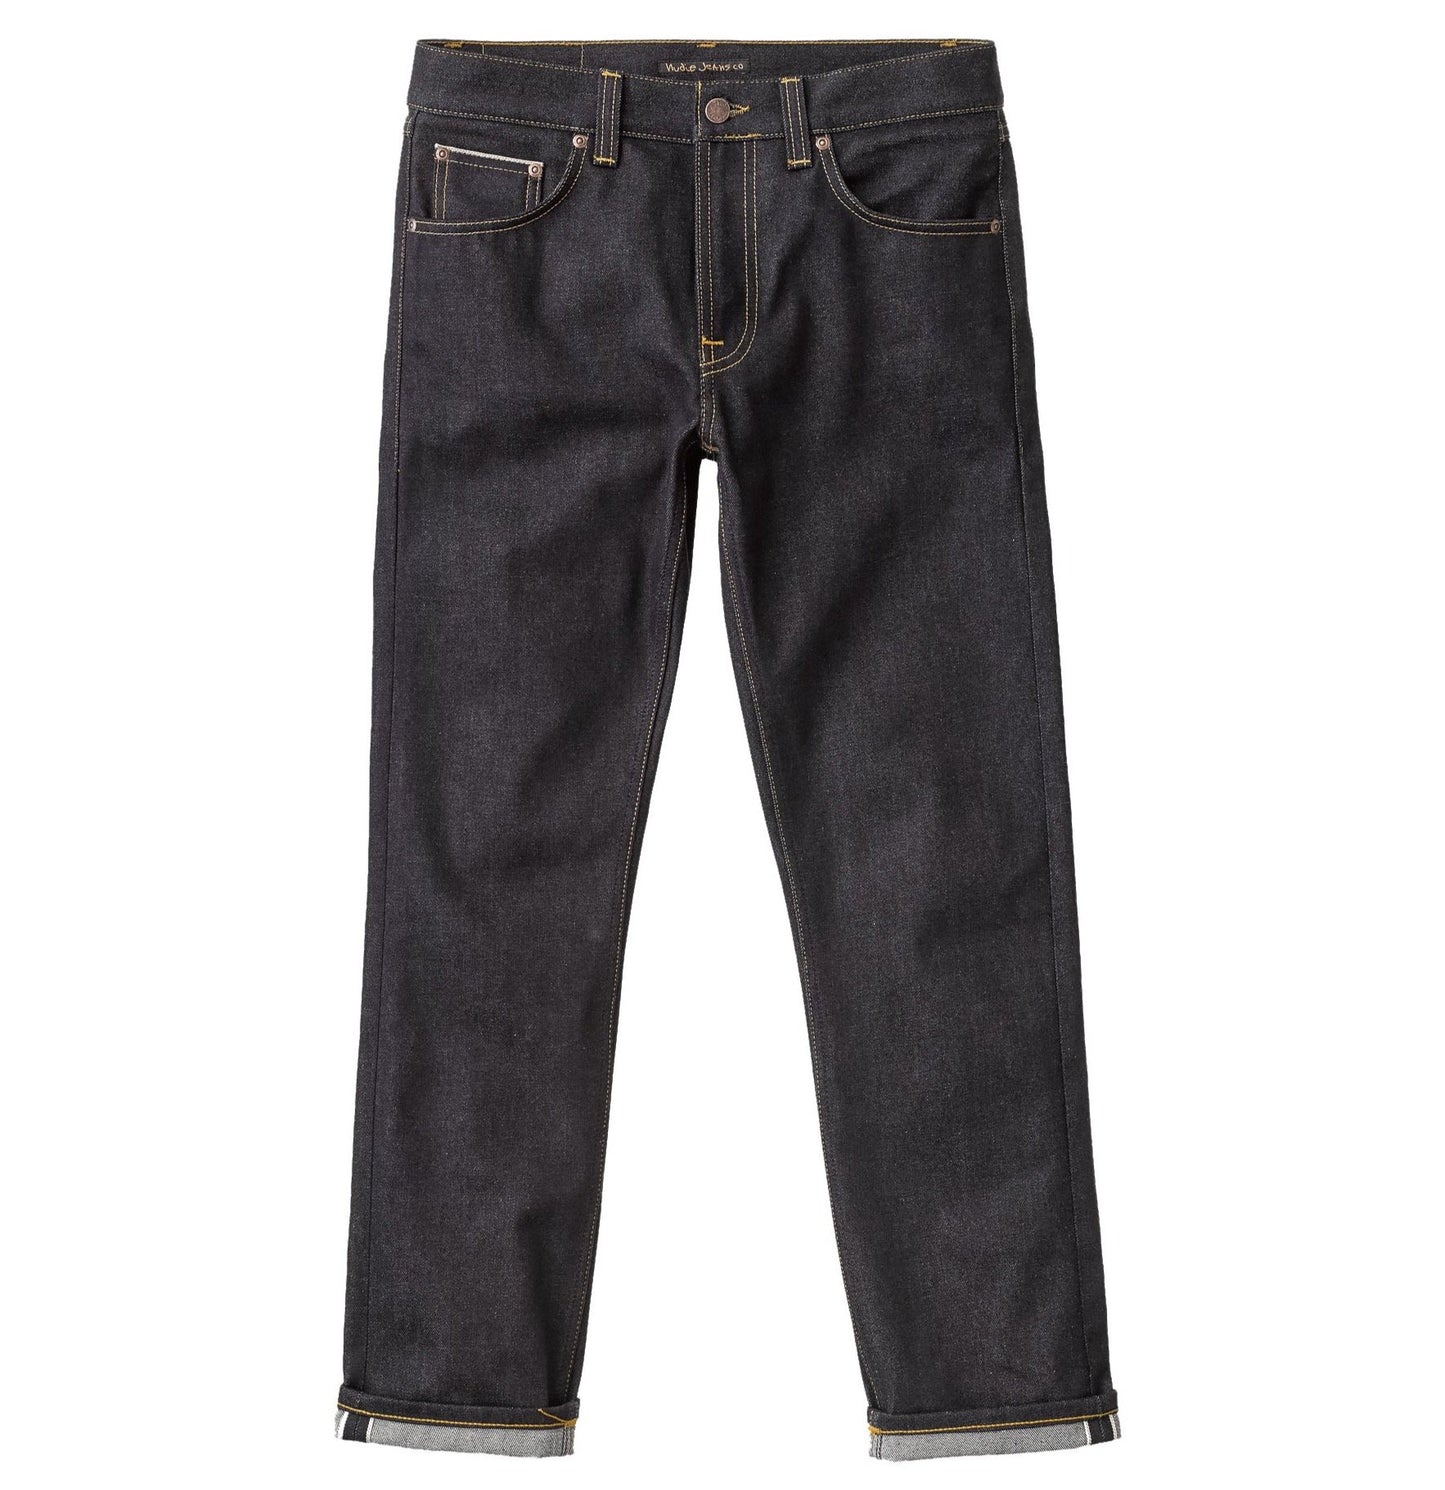 Nudie Jeans Gritty Jackson Selvage Jean